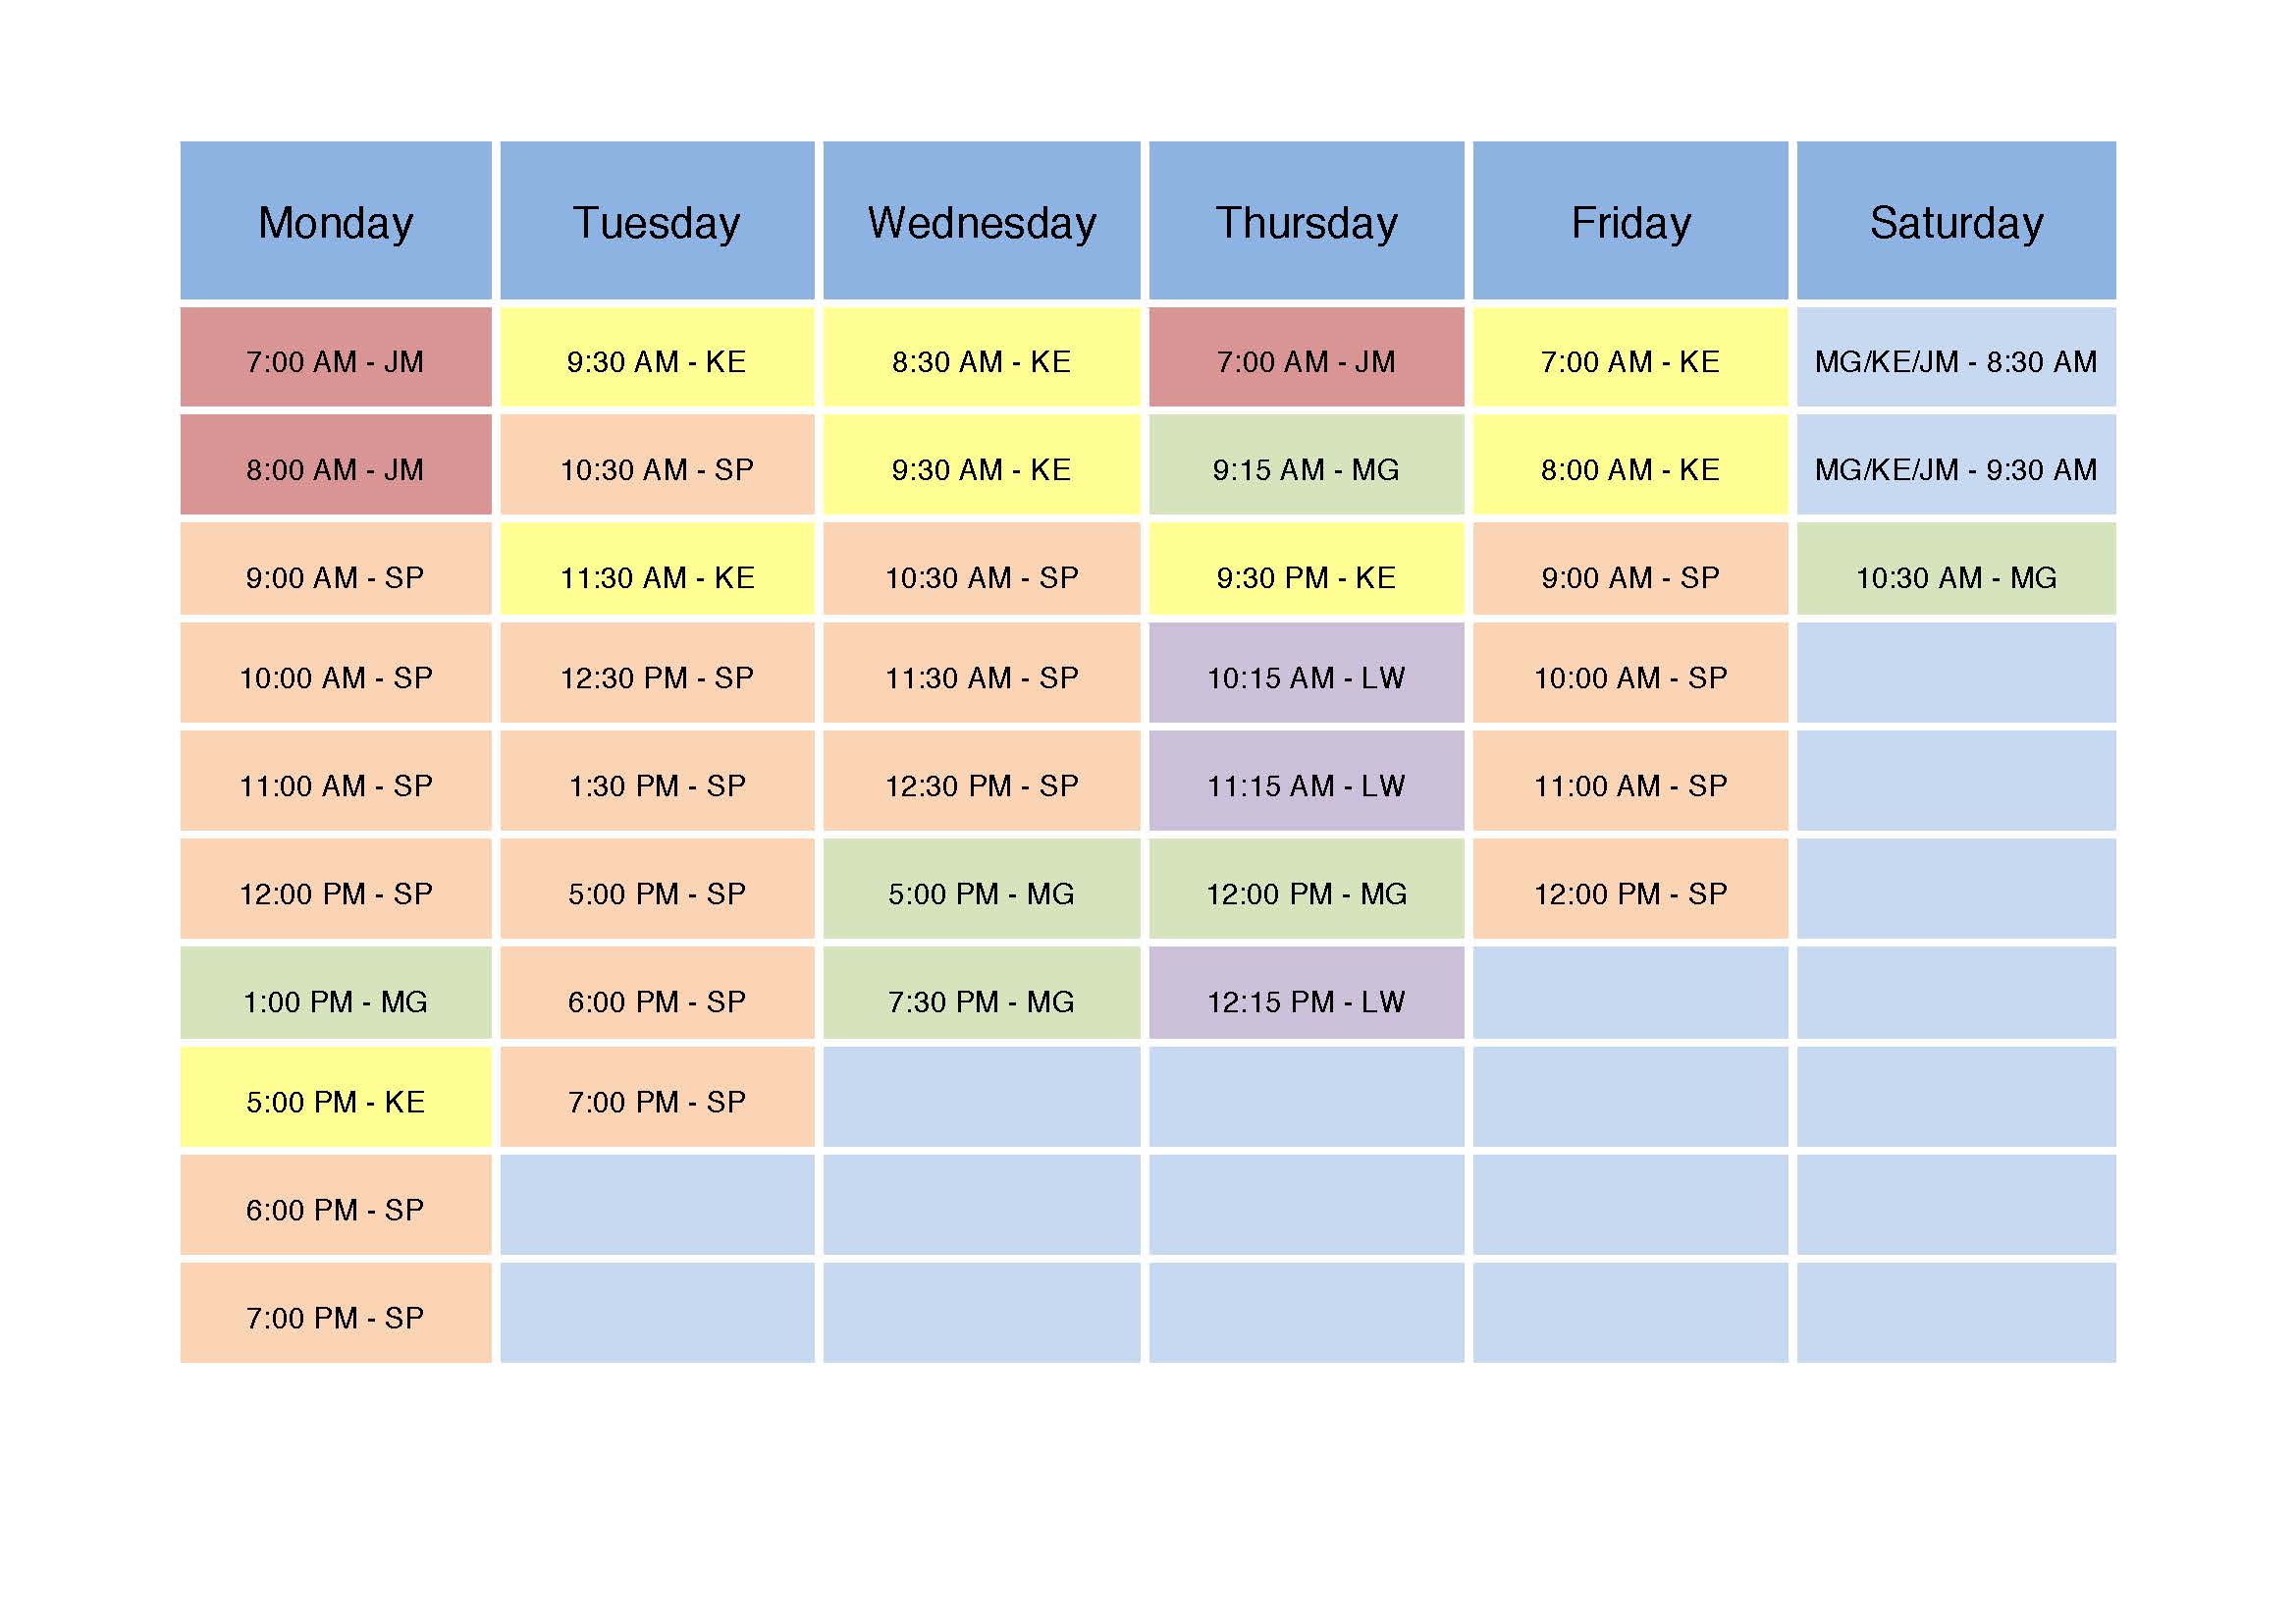 Pilates Timetable Updated